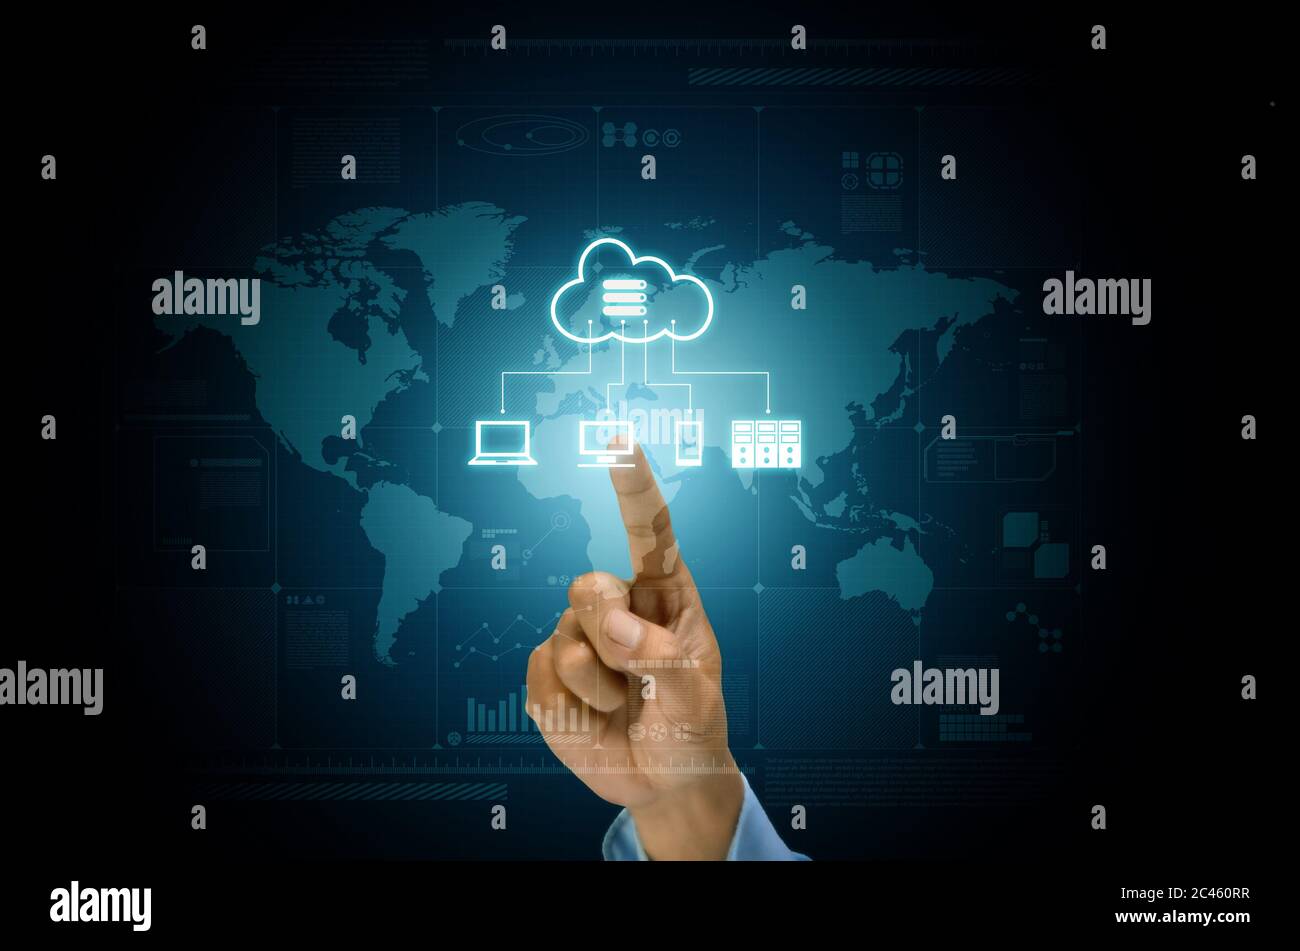 Cloud server application and hosting on internet network conceptual image Stock Photo